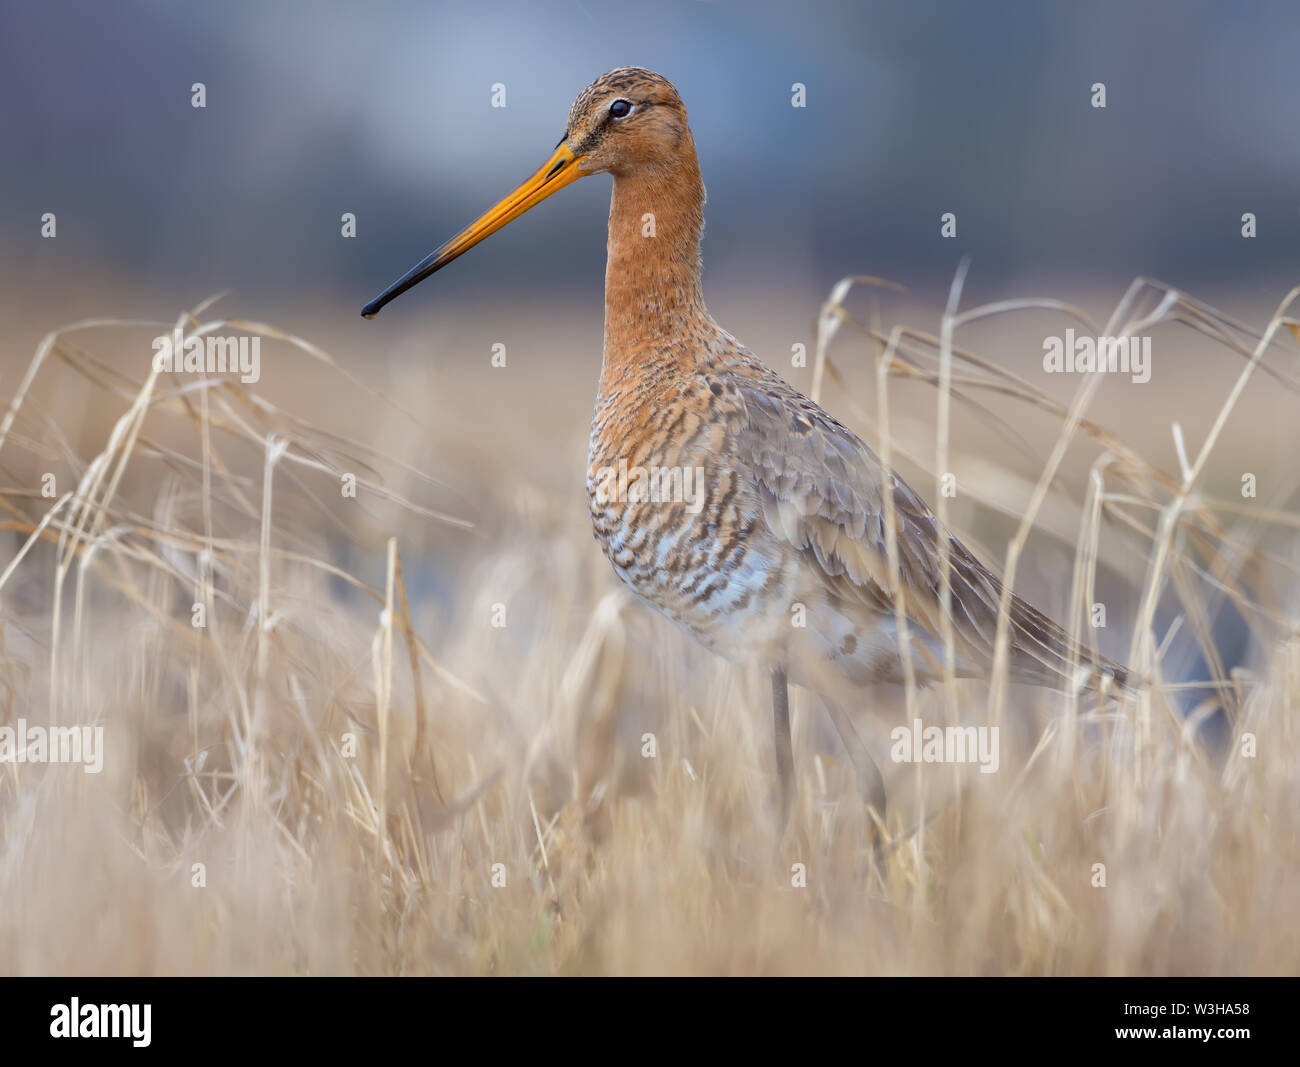 Black-tailed godwit posing in dry yellow grass in early spring field near a pond Stock Photo